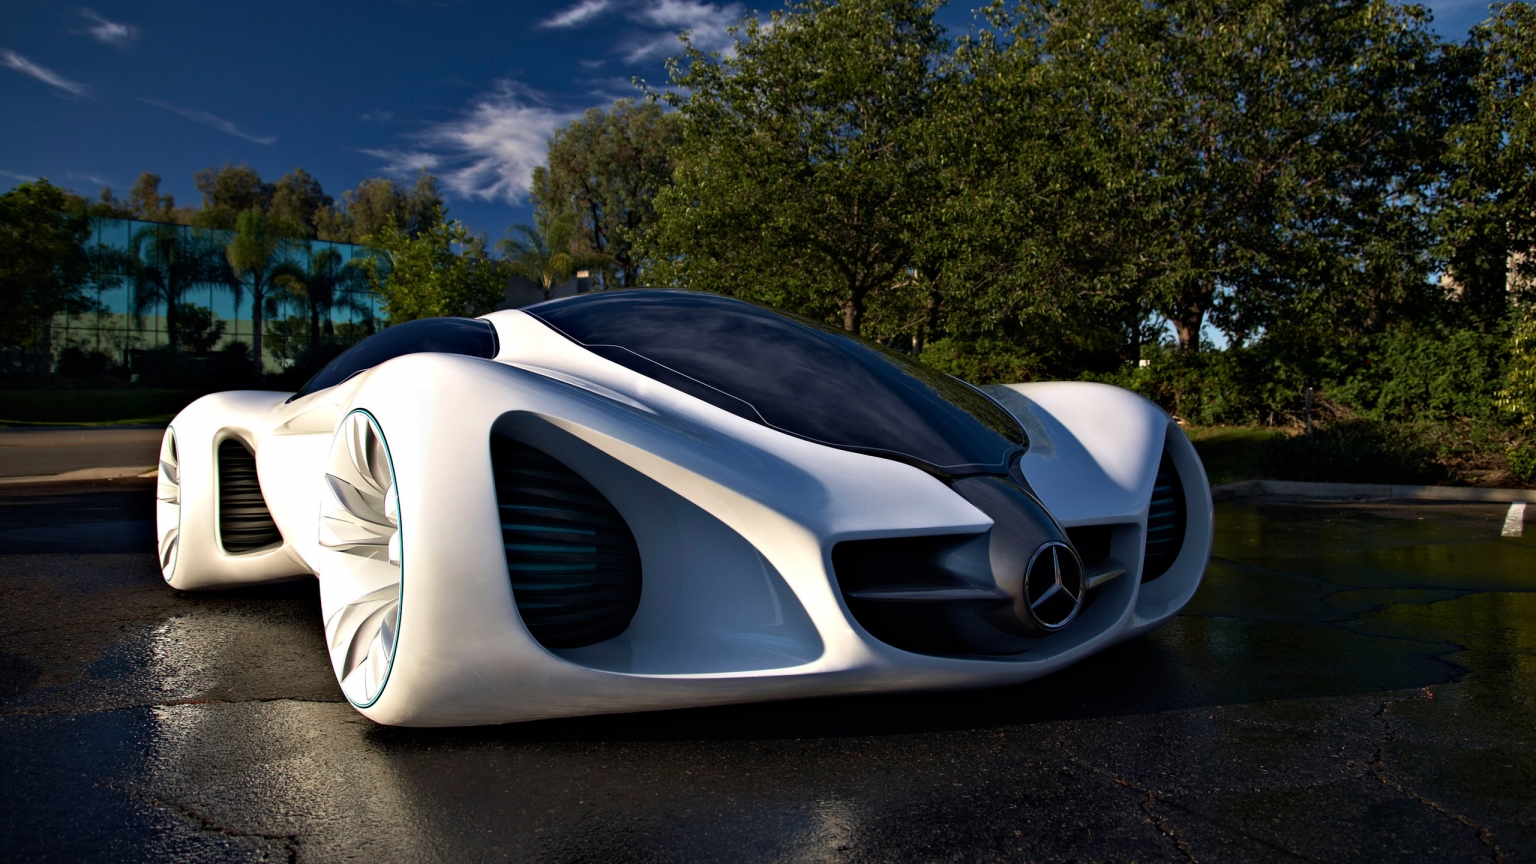 Mercedes Benz Biome for 1536 x 864 HDTV resolution